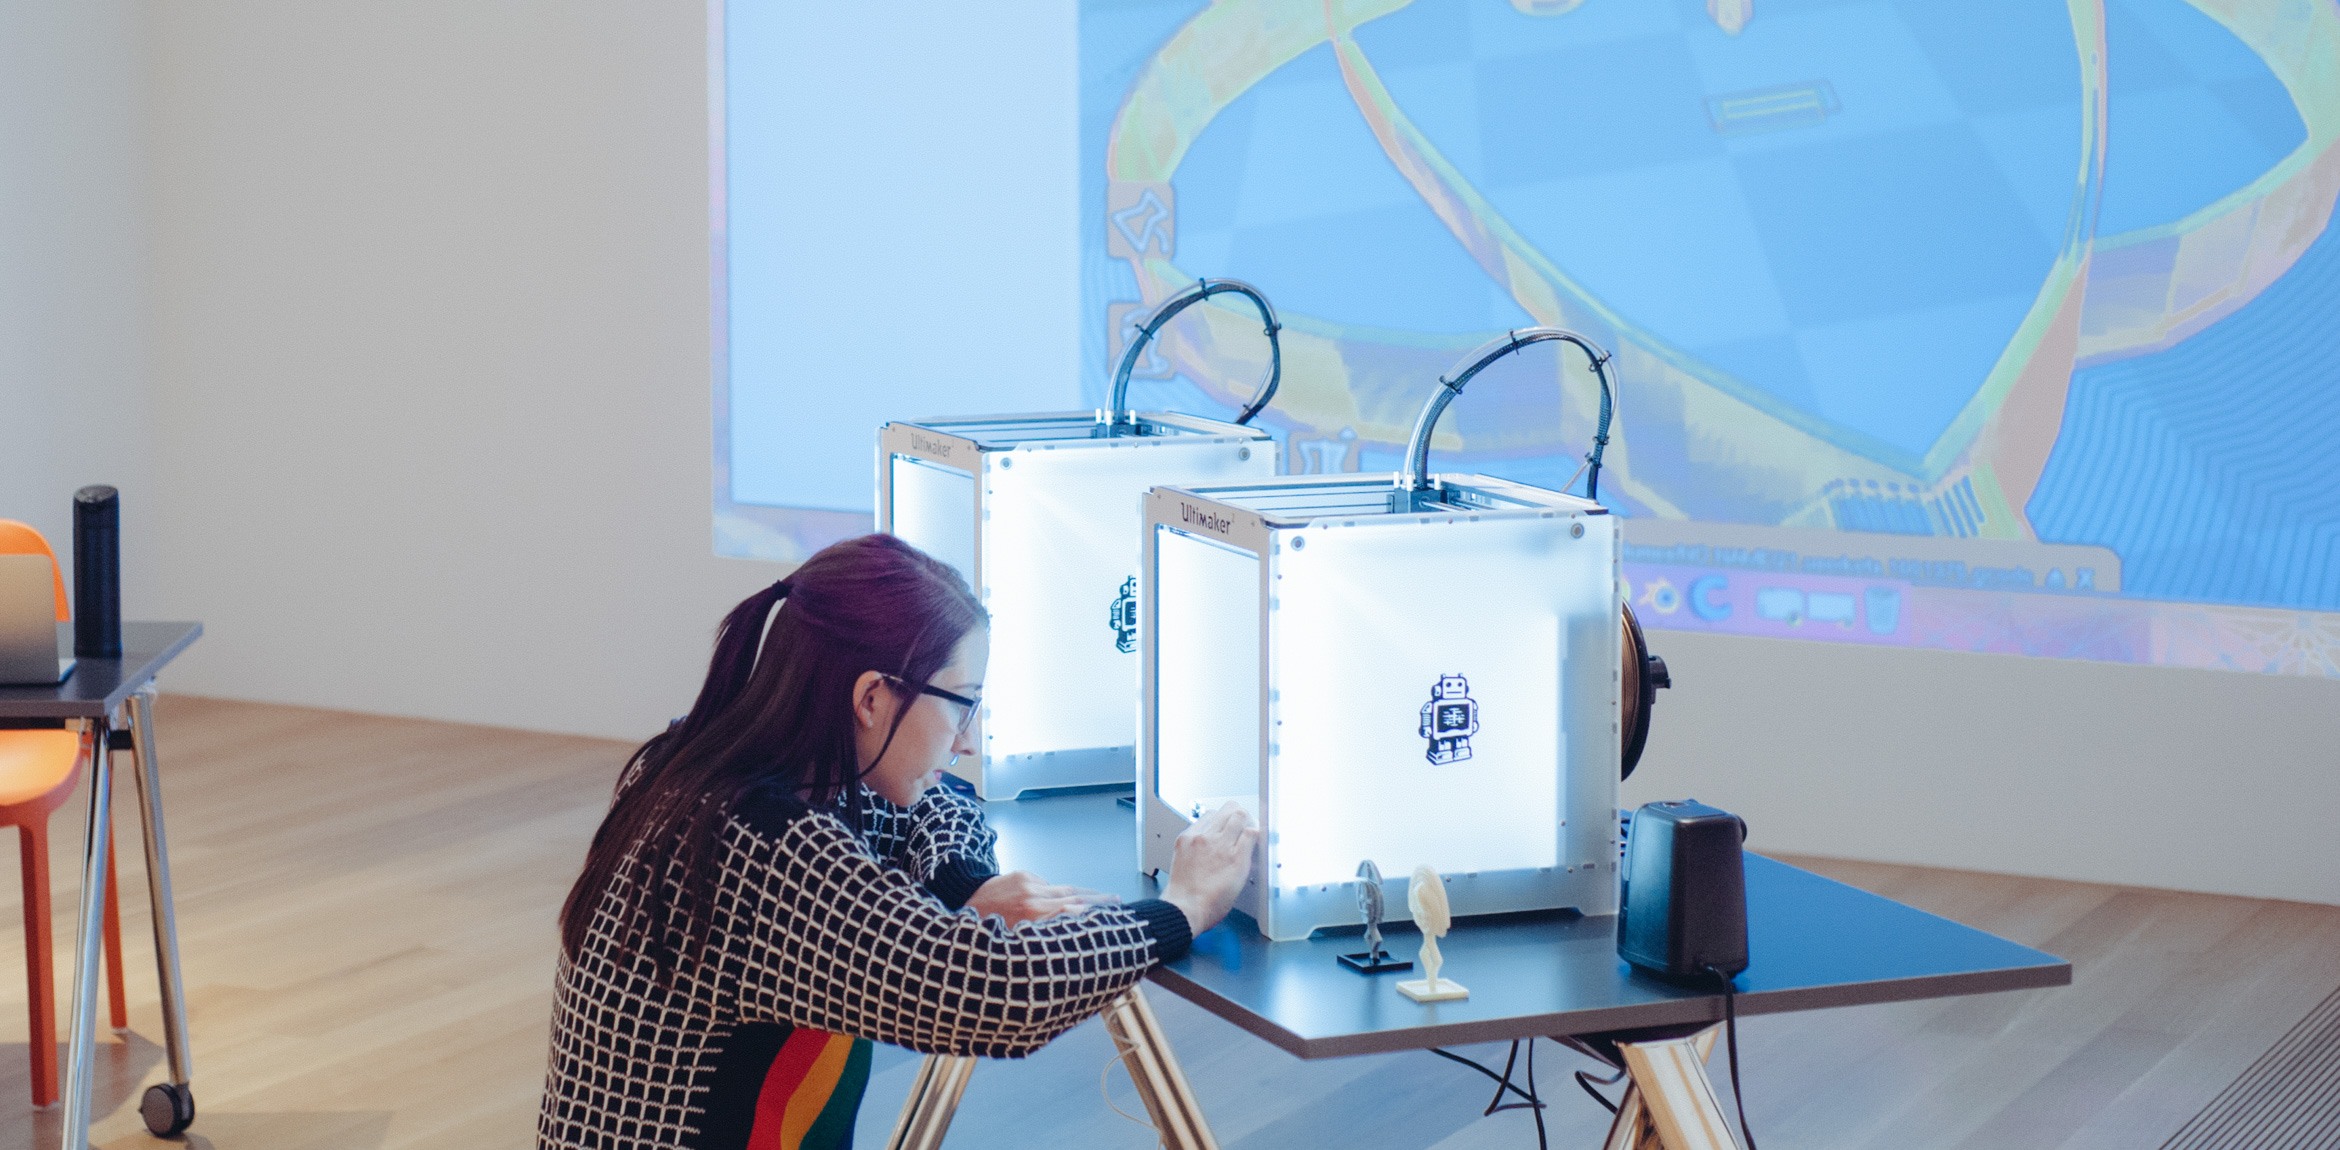 A participant interacts with one of the 3-D printers.